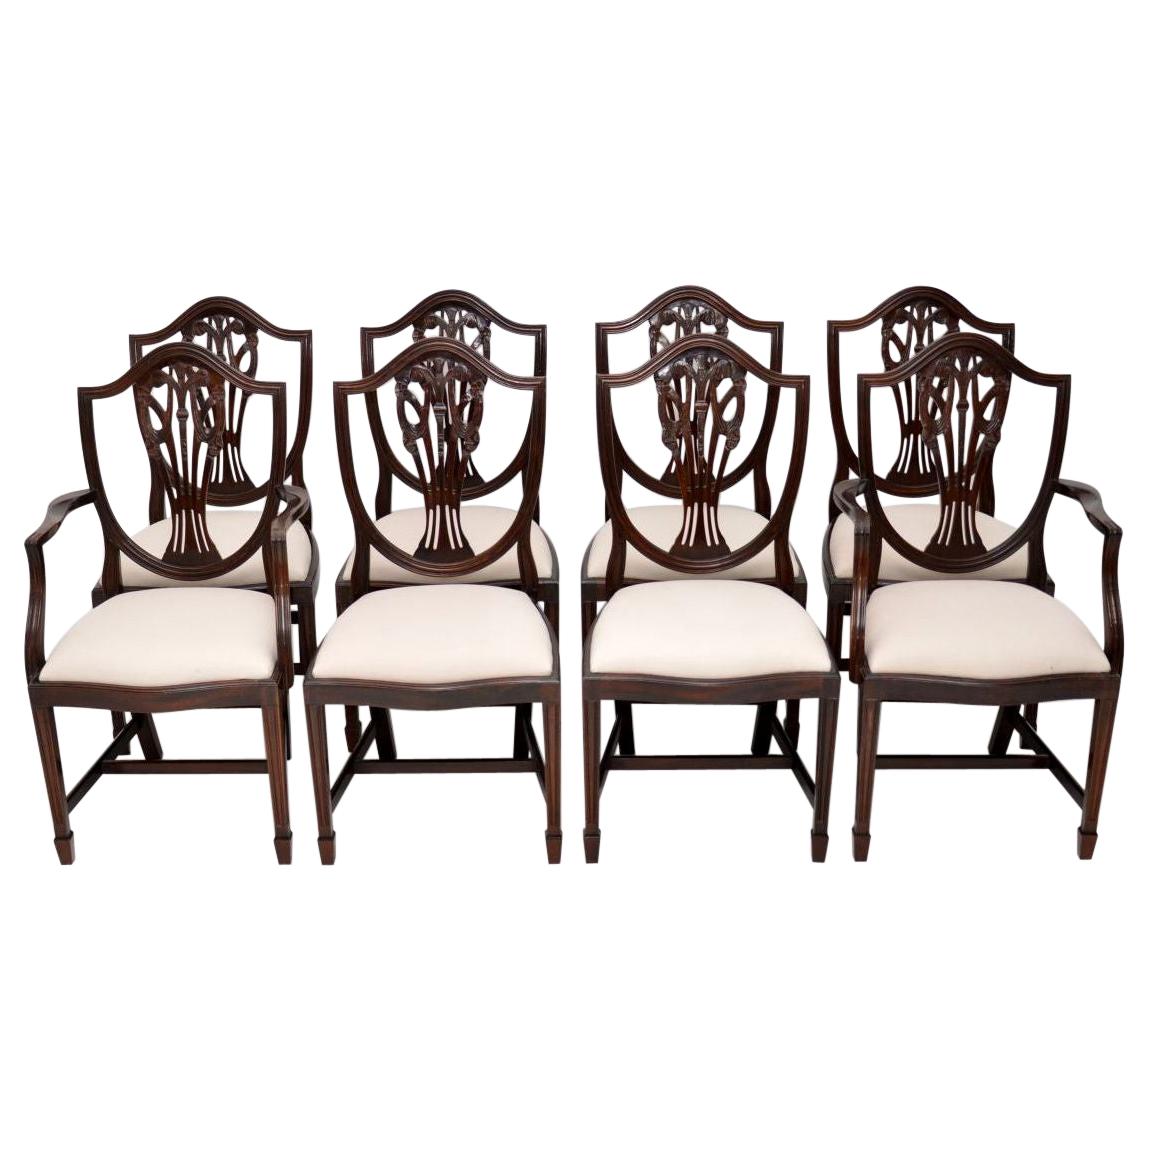 Set of 8 Antique Sheraton Style Mahogany Shield Back Dining Chairs